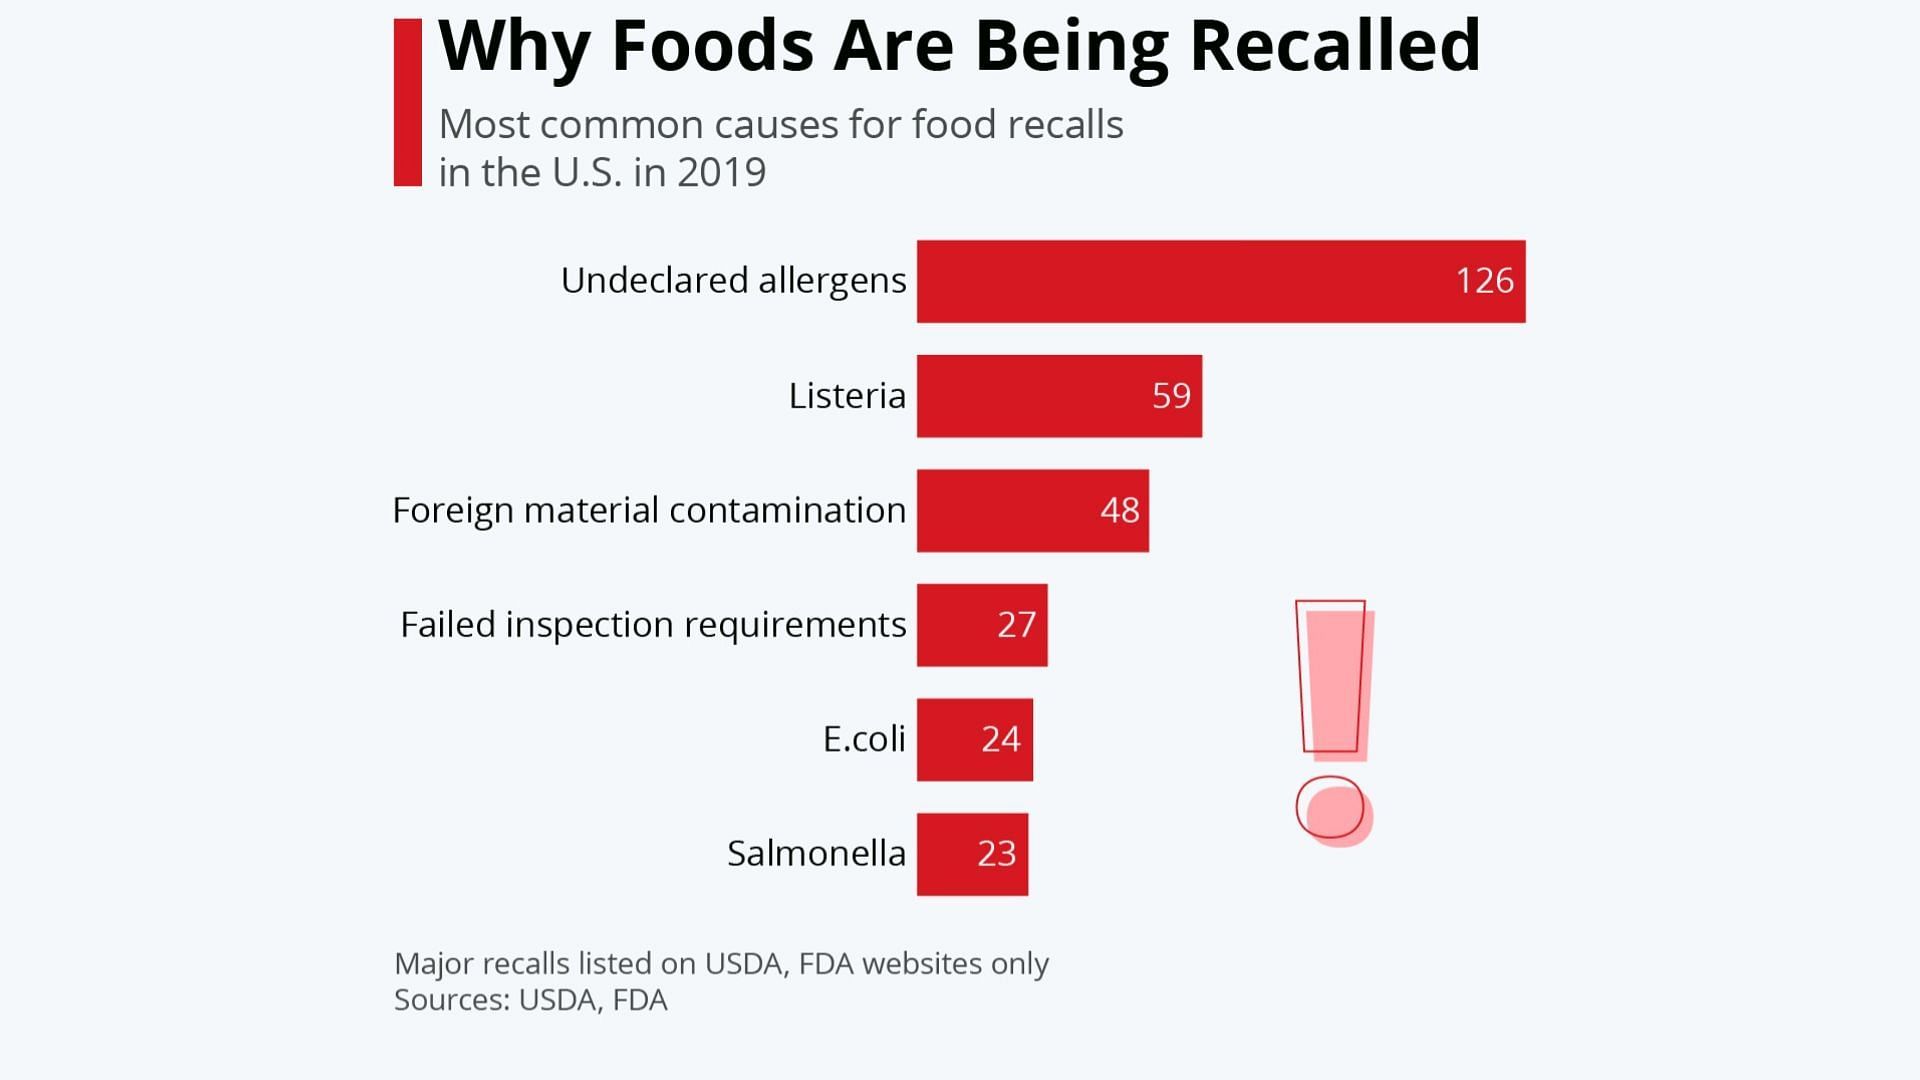 causes of food recalls in the year 2019 (Image via Statista)